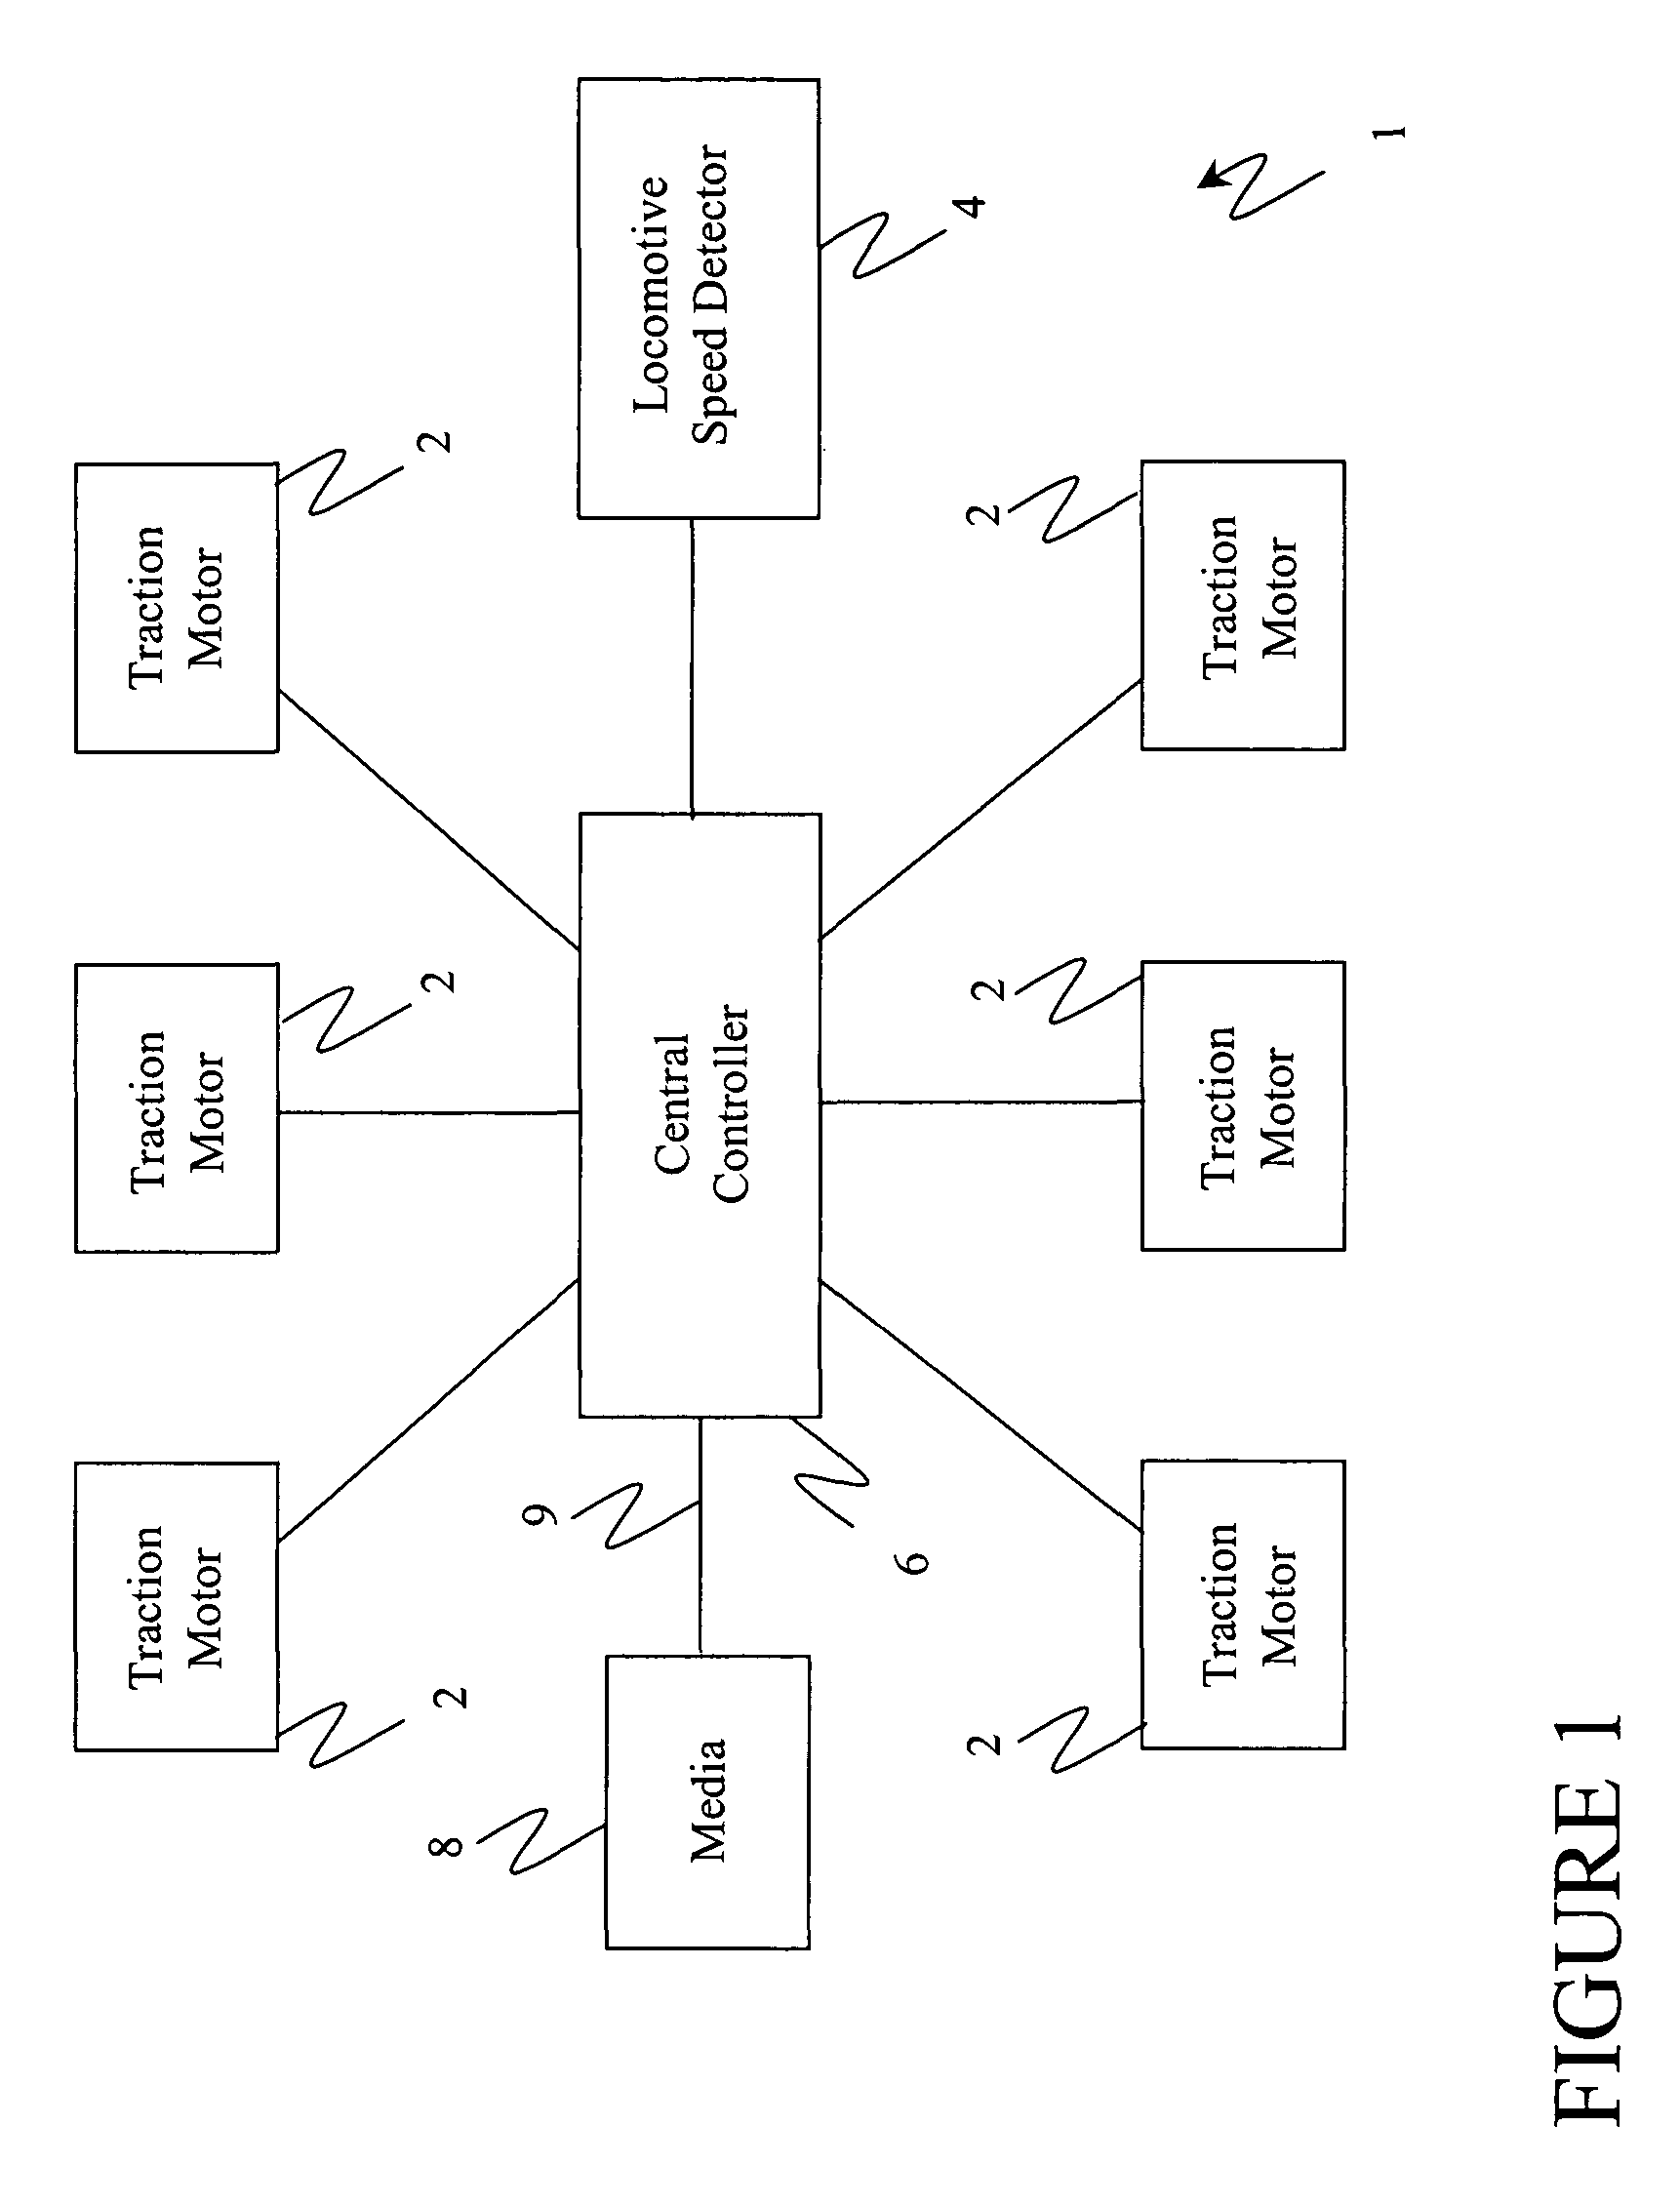 Method for determining the rotational velocity of an axle and detecting a locked axle condition